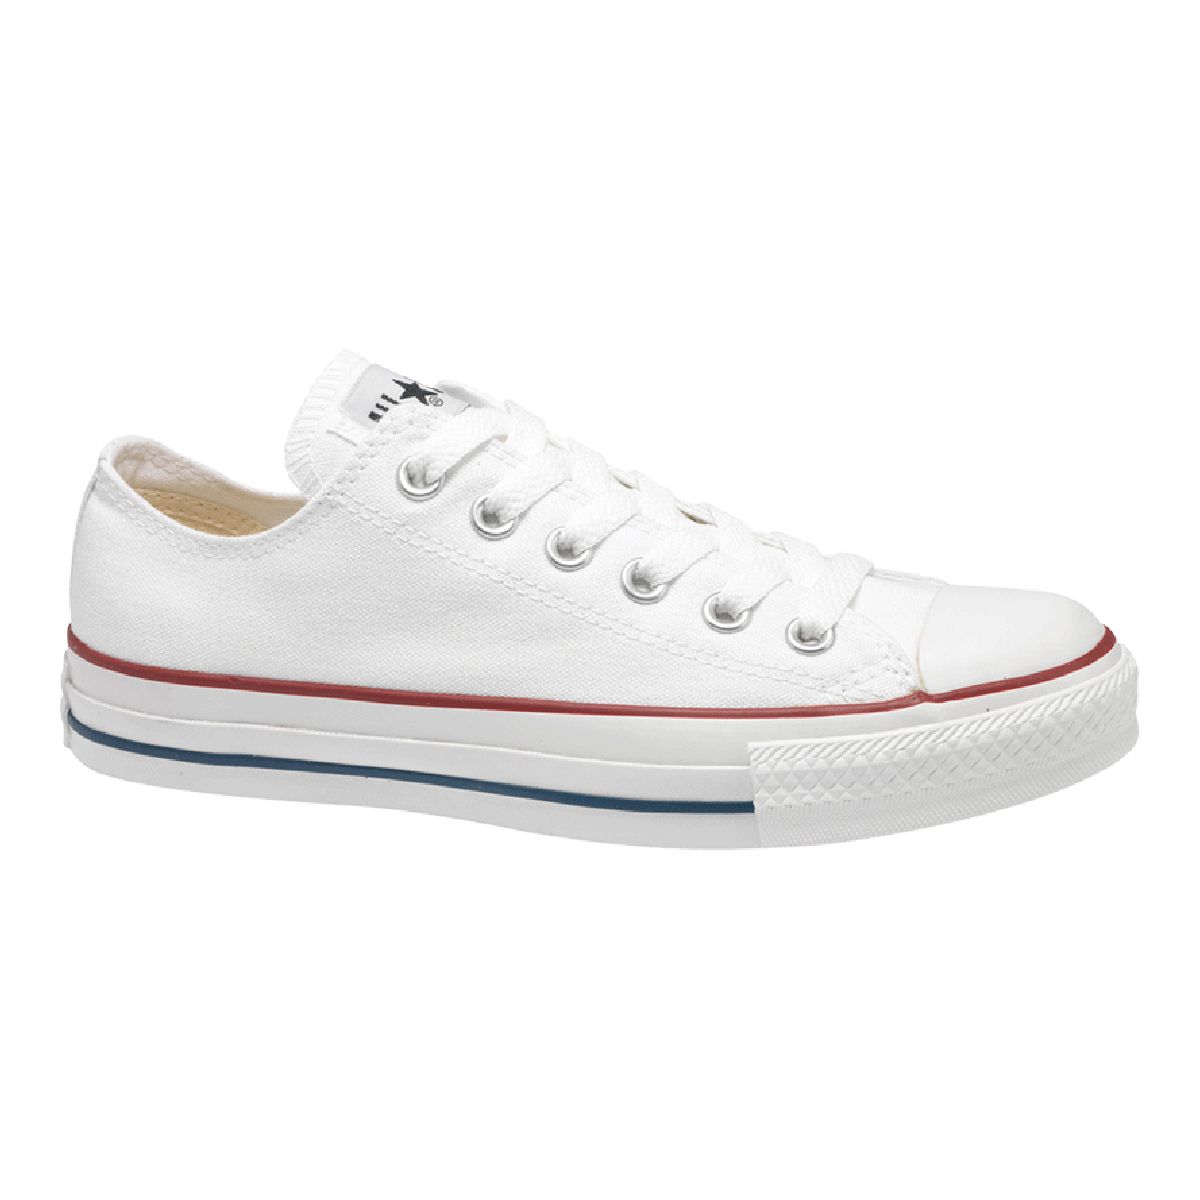 Converse Women's Chuck Taylor All Star Ox Shoes  Sneakers Canvas